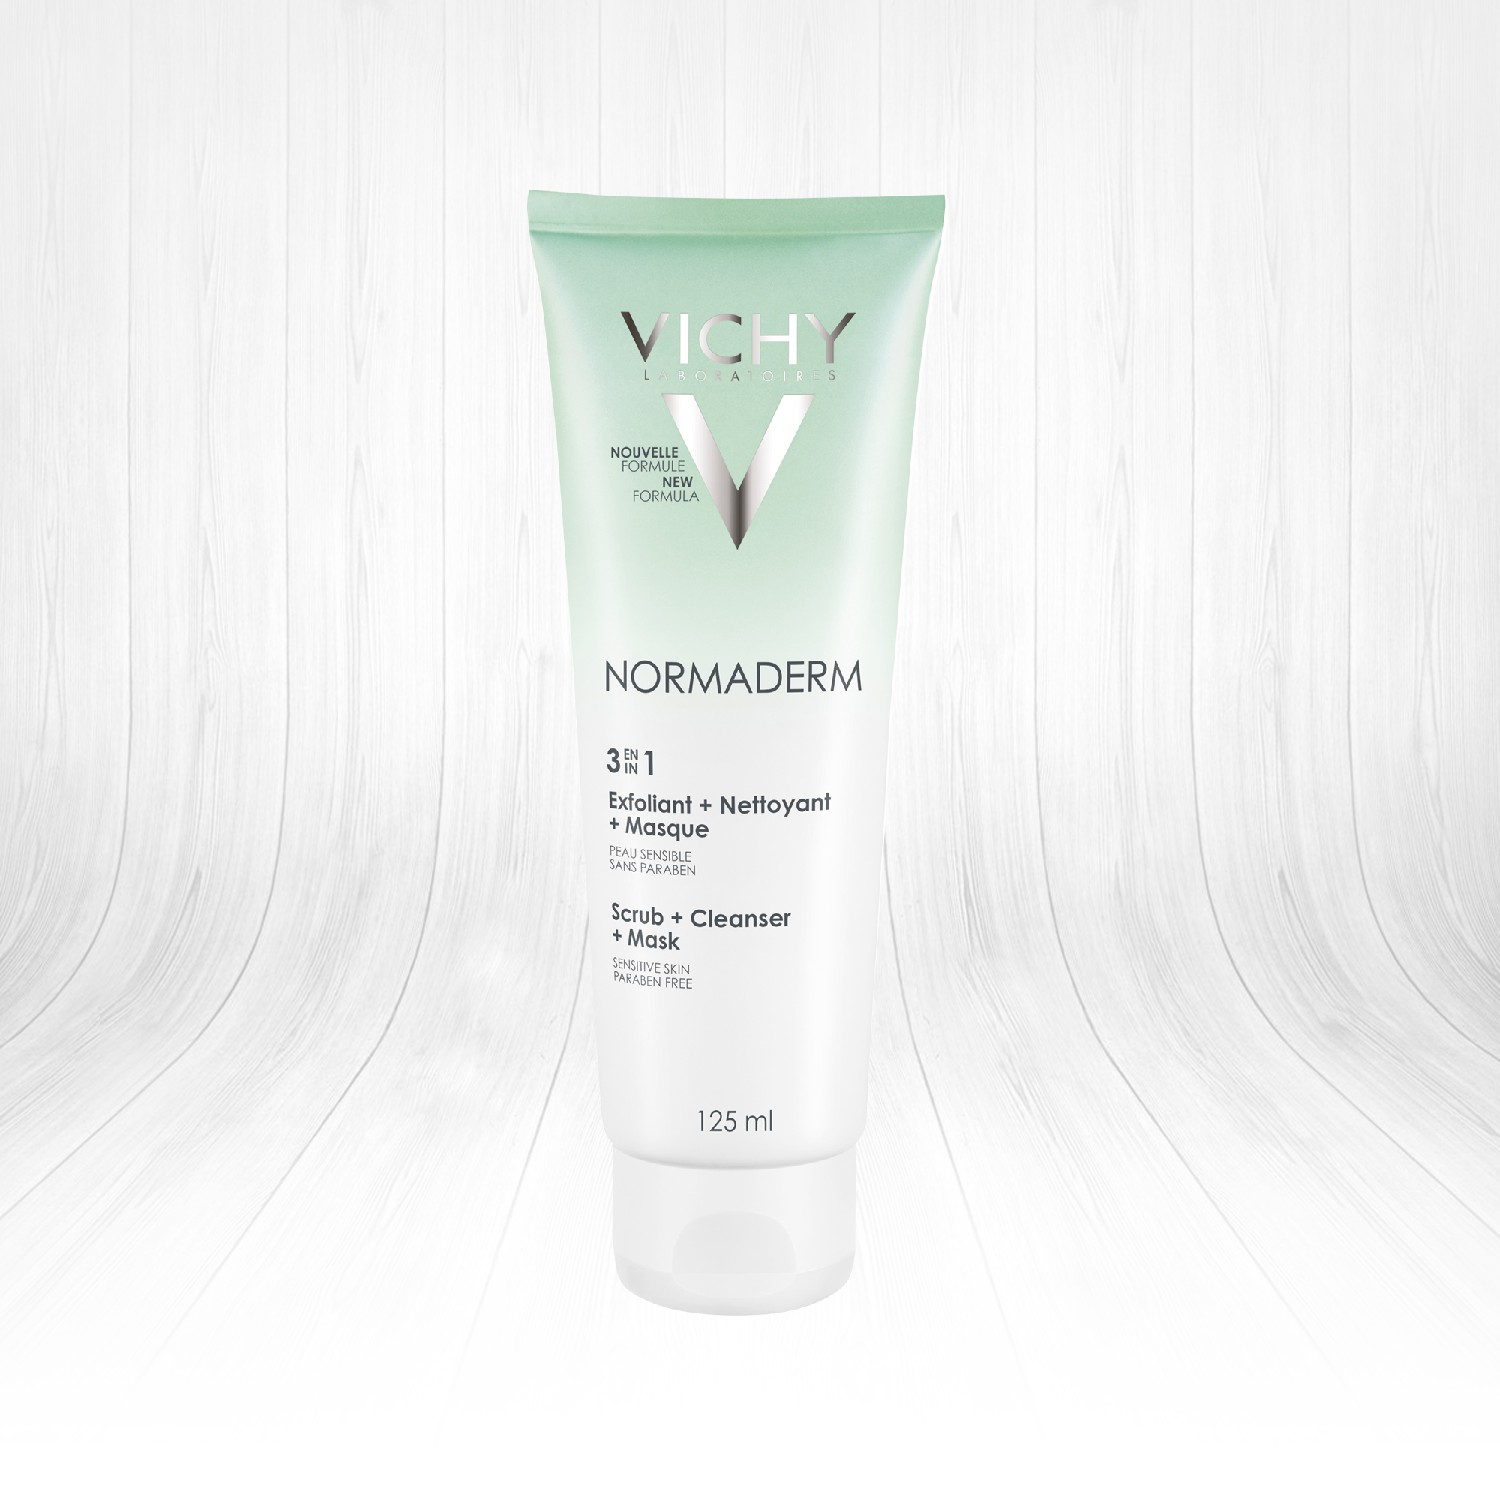 Vichy Normaderm in